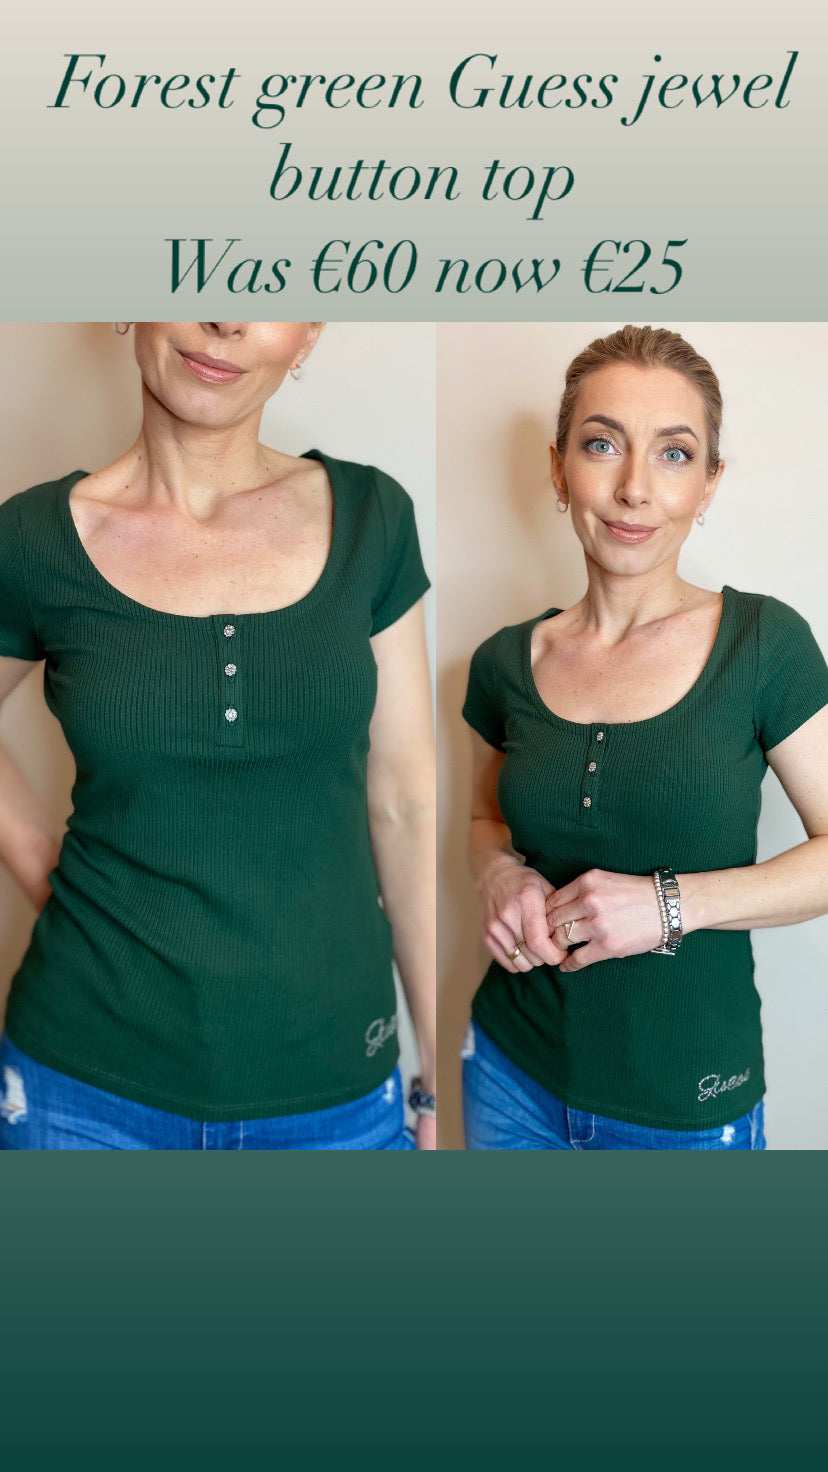 Forest green Guess jewel button top